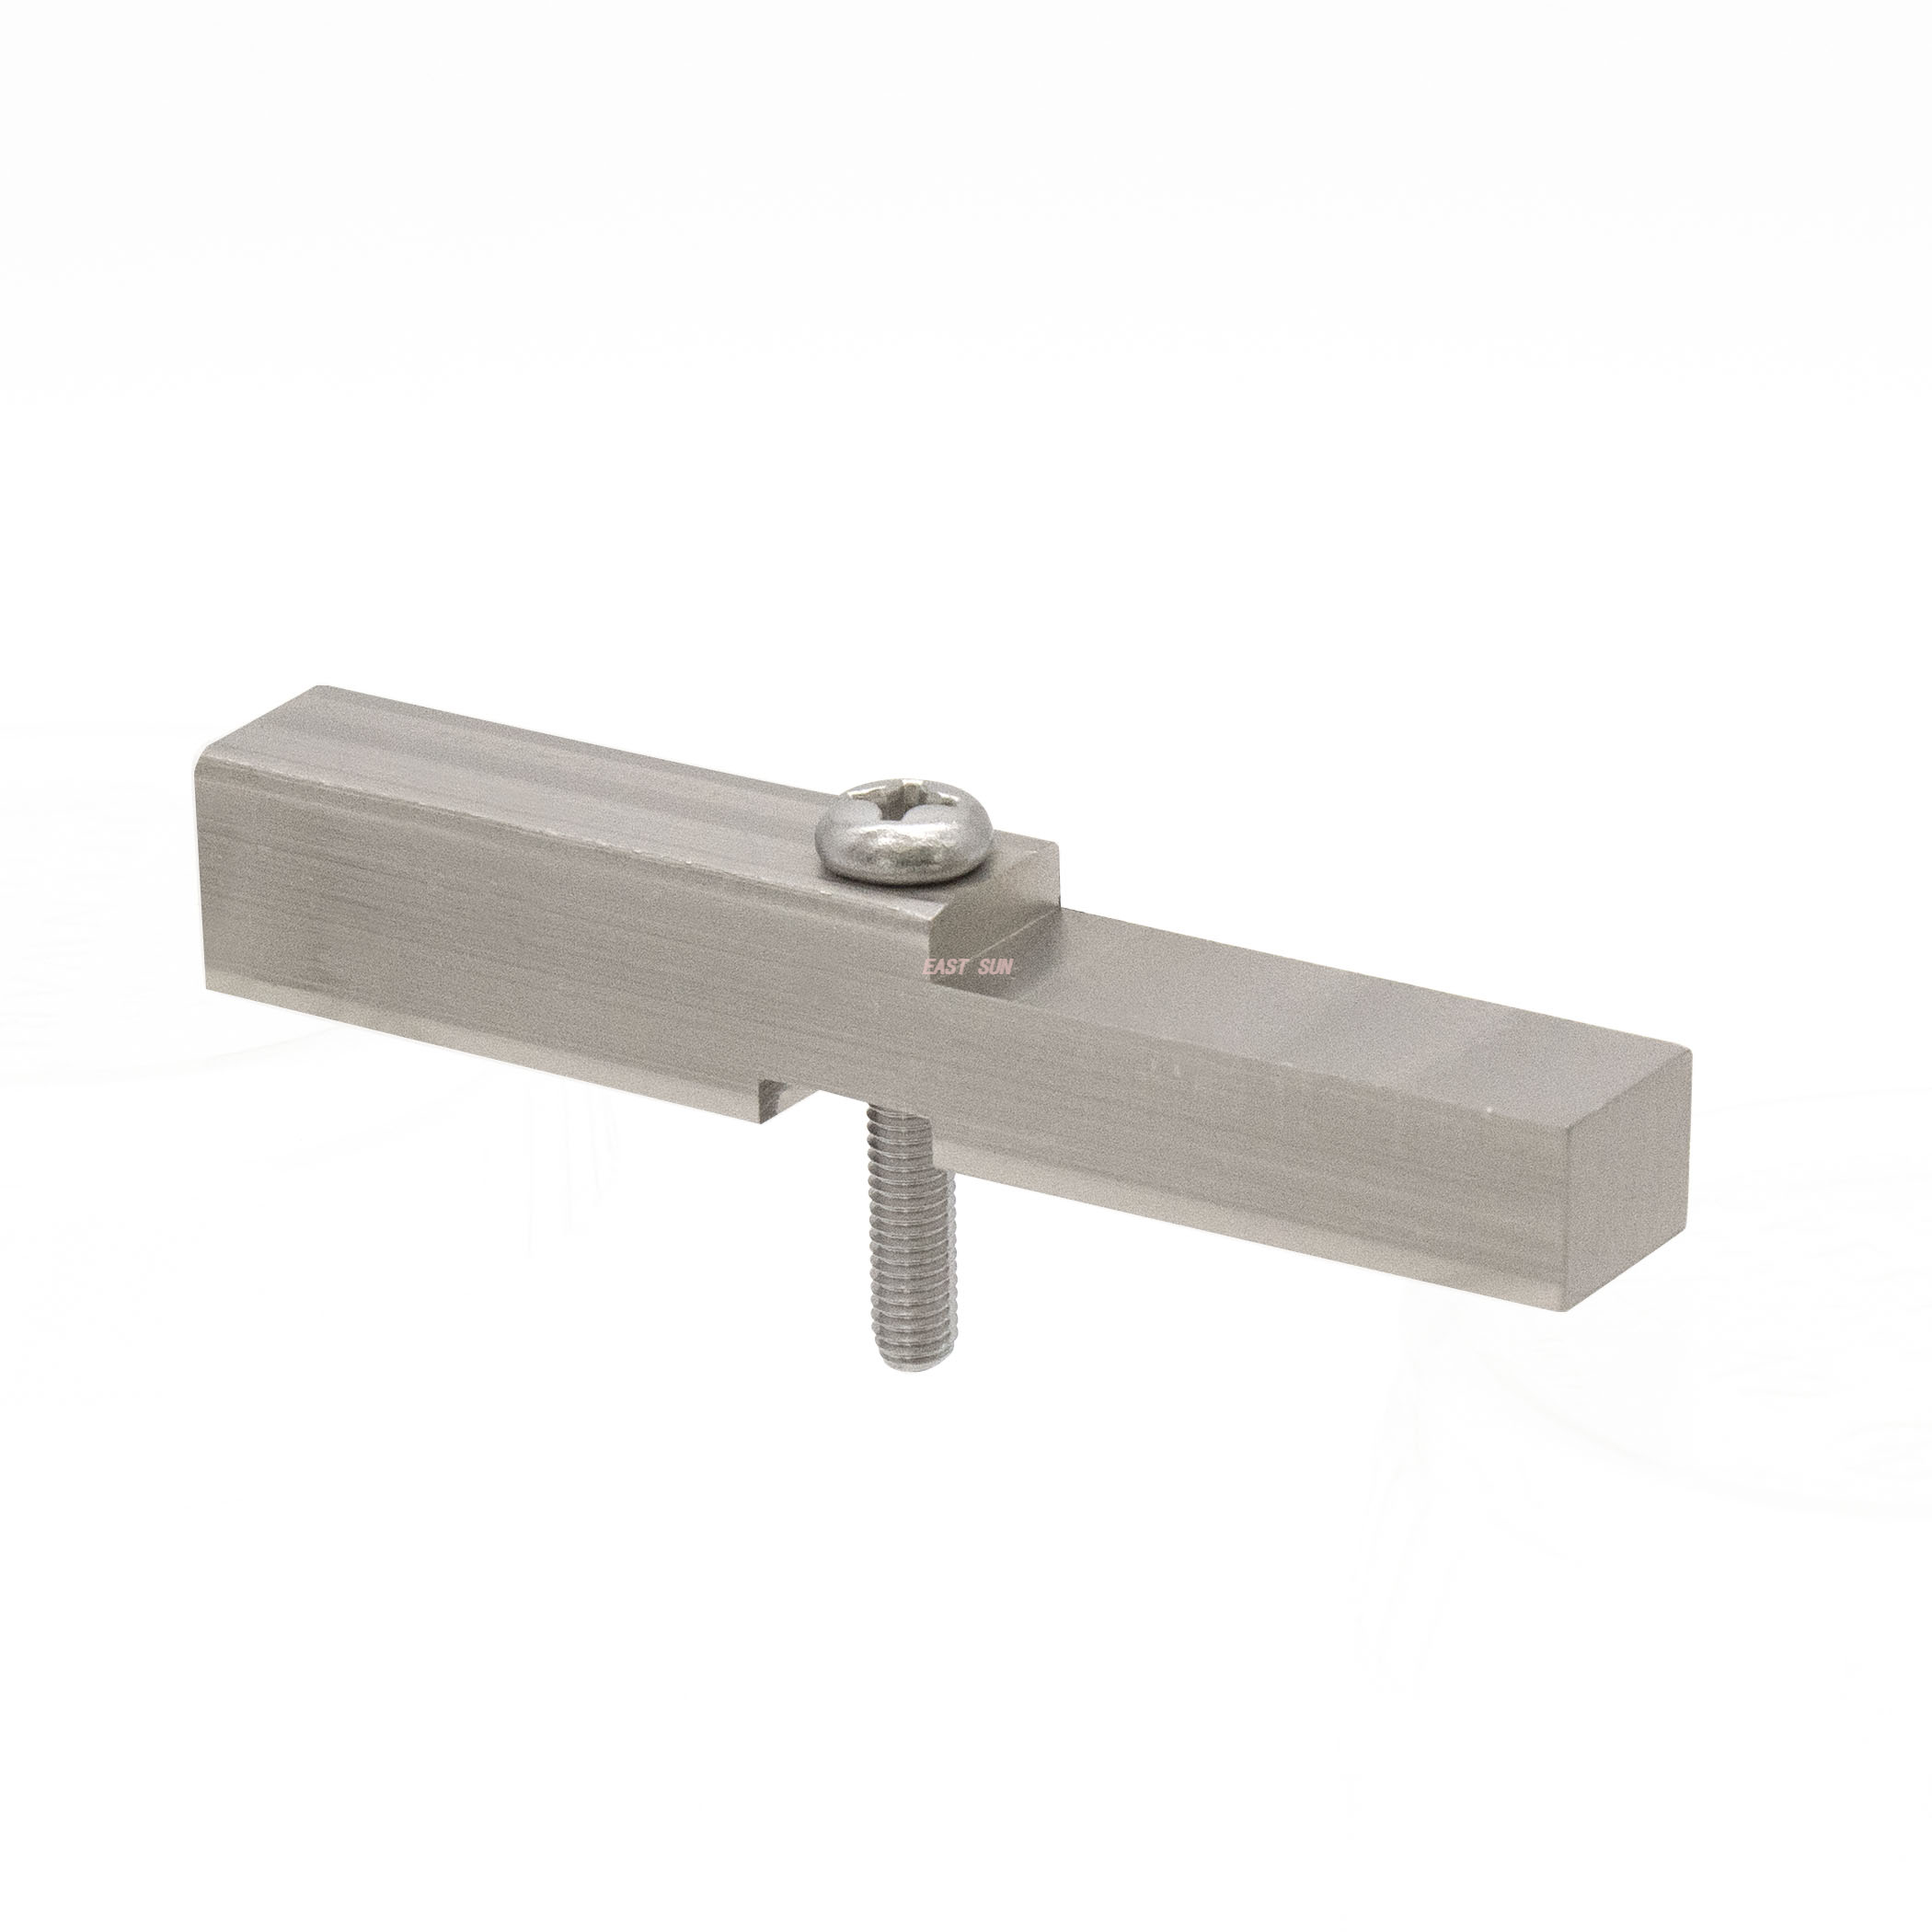 Adapter Block for Pivot Hinges